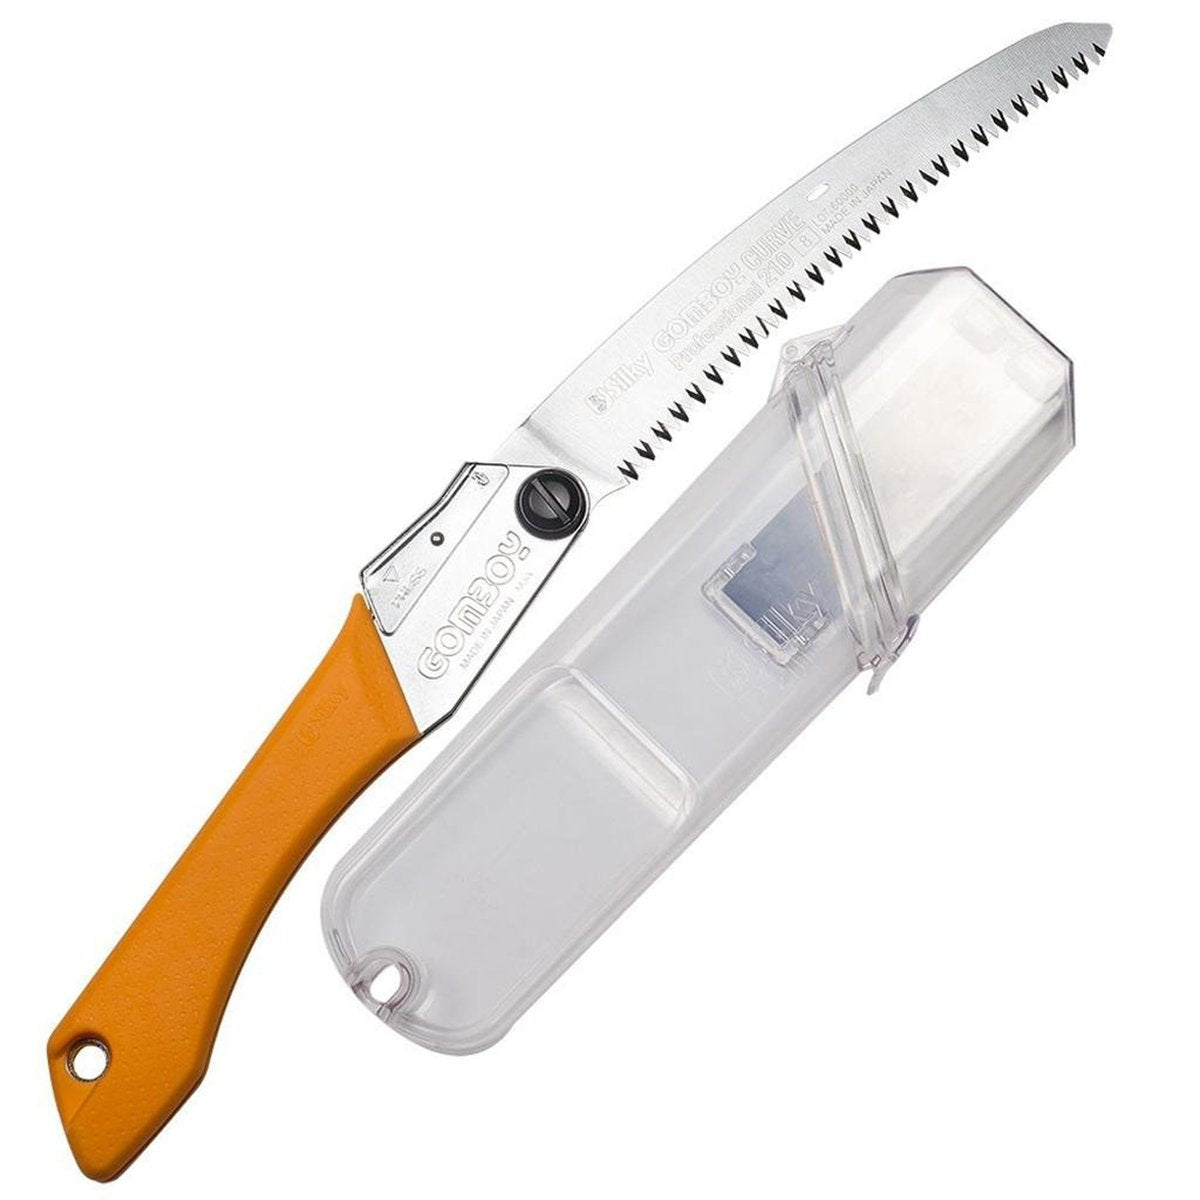 210mm Silky Gomboy folding saw with curved blade for pruning and orange rubber handle. With clear plastic storage case.